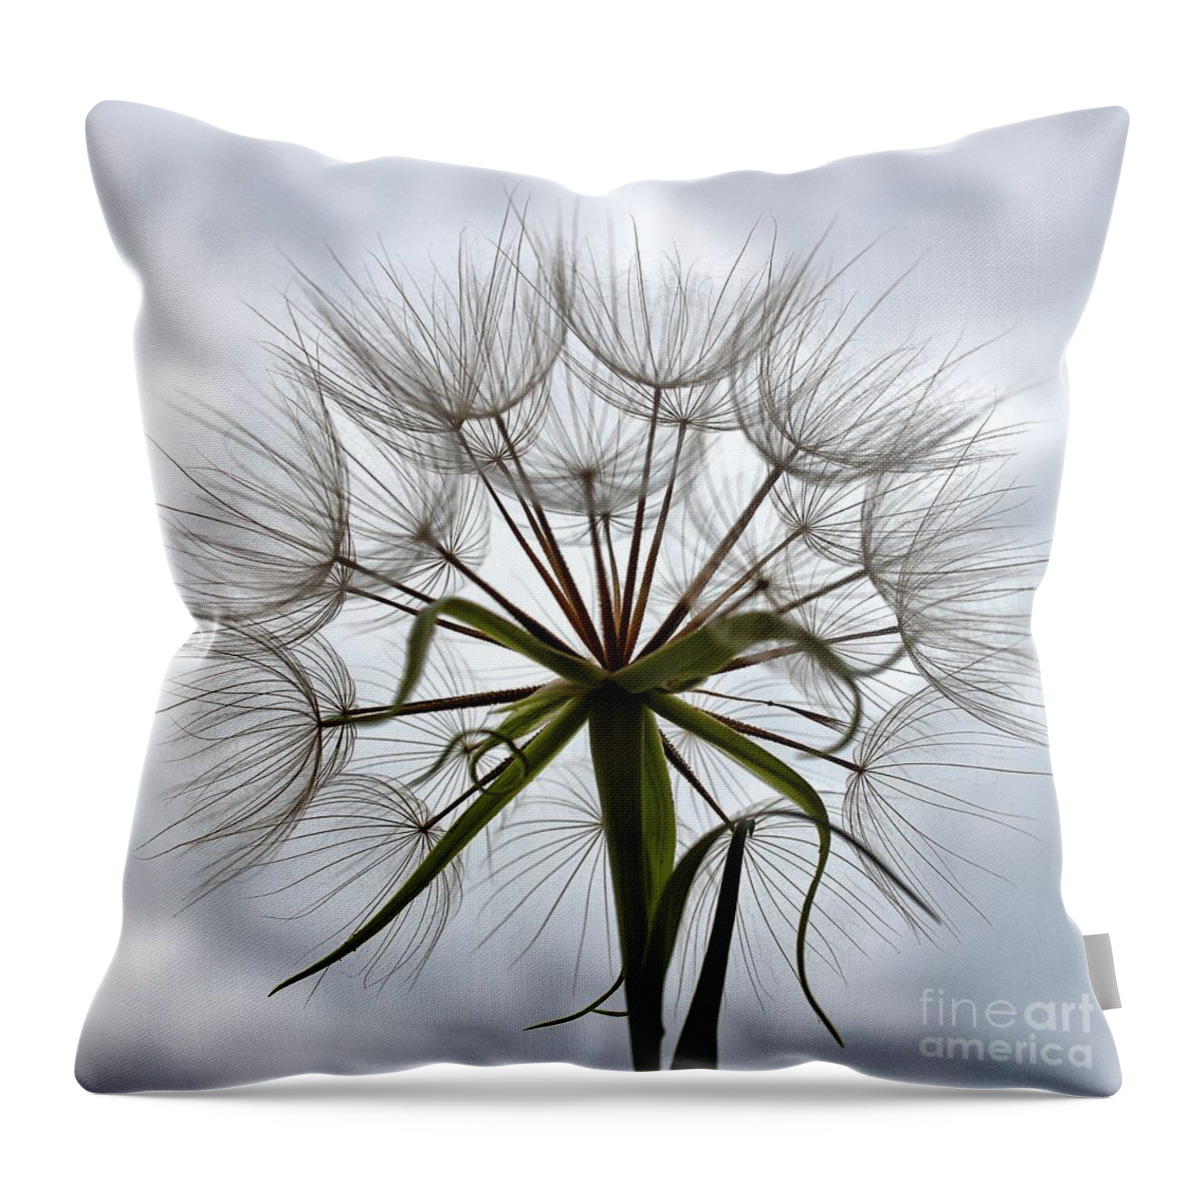 Dandelion Throw Pillow featuring the photograph Sky Pod by Kim Yarbrough